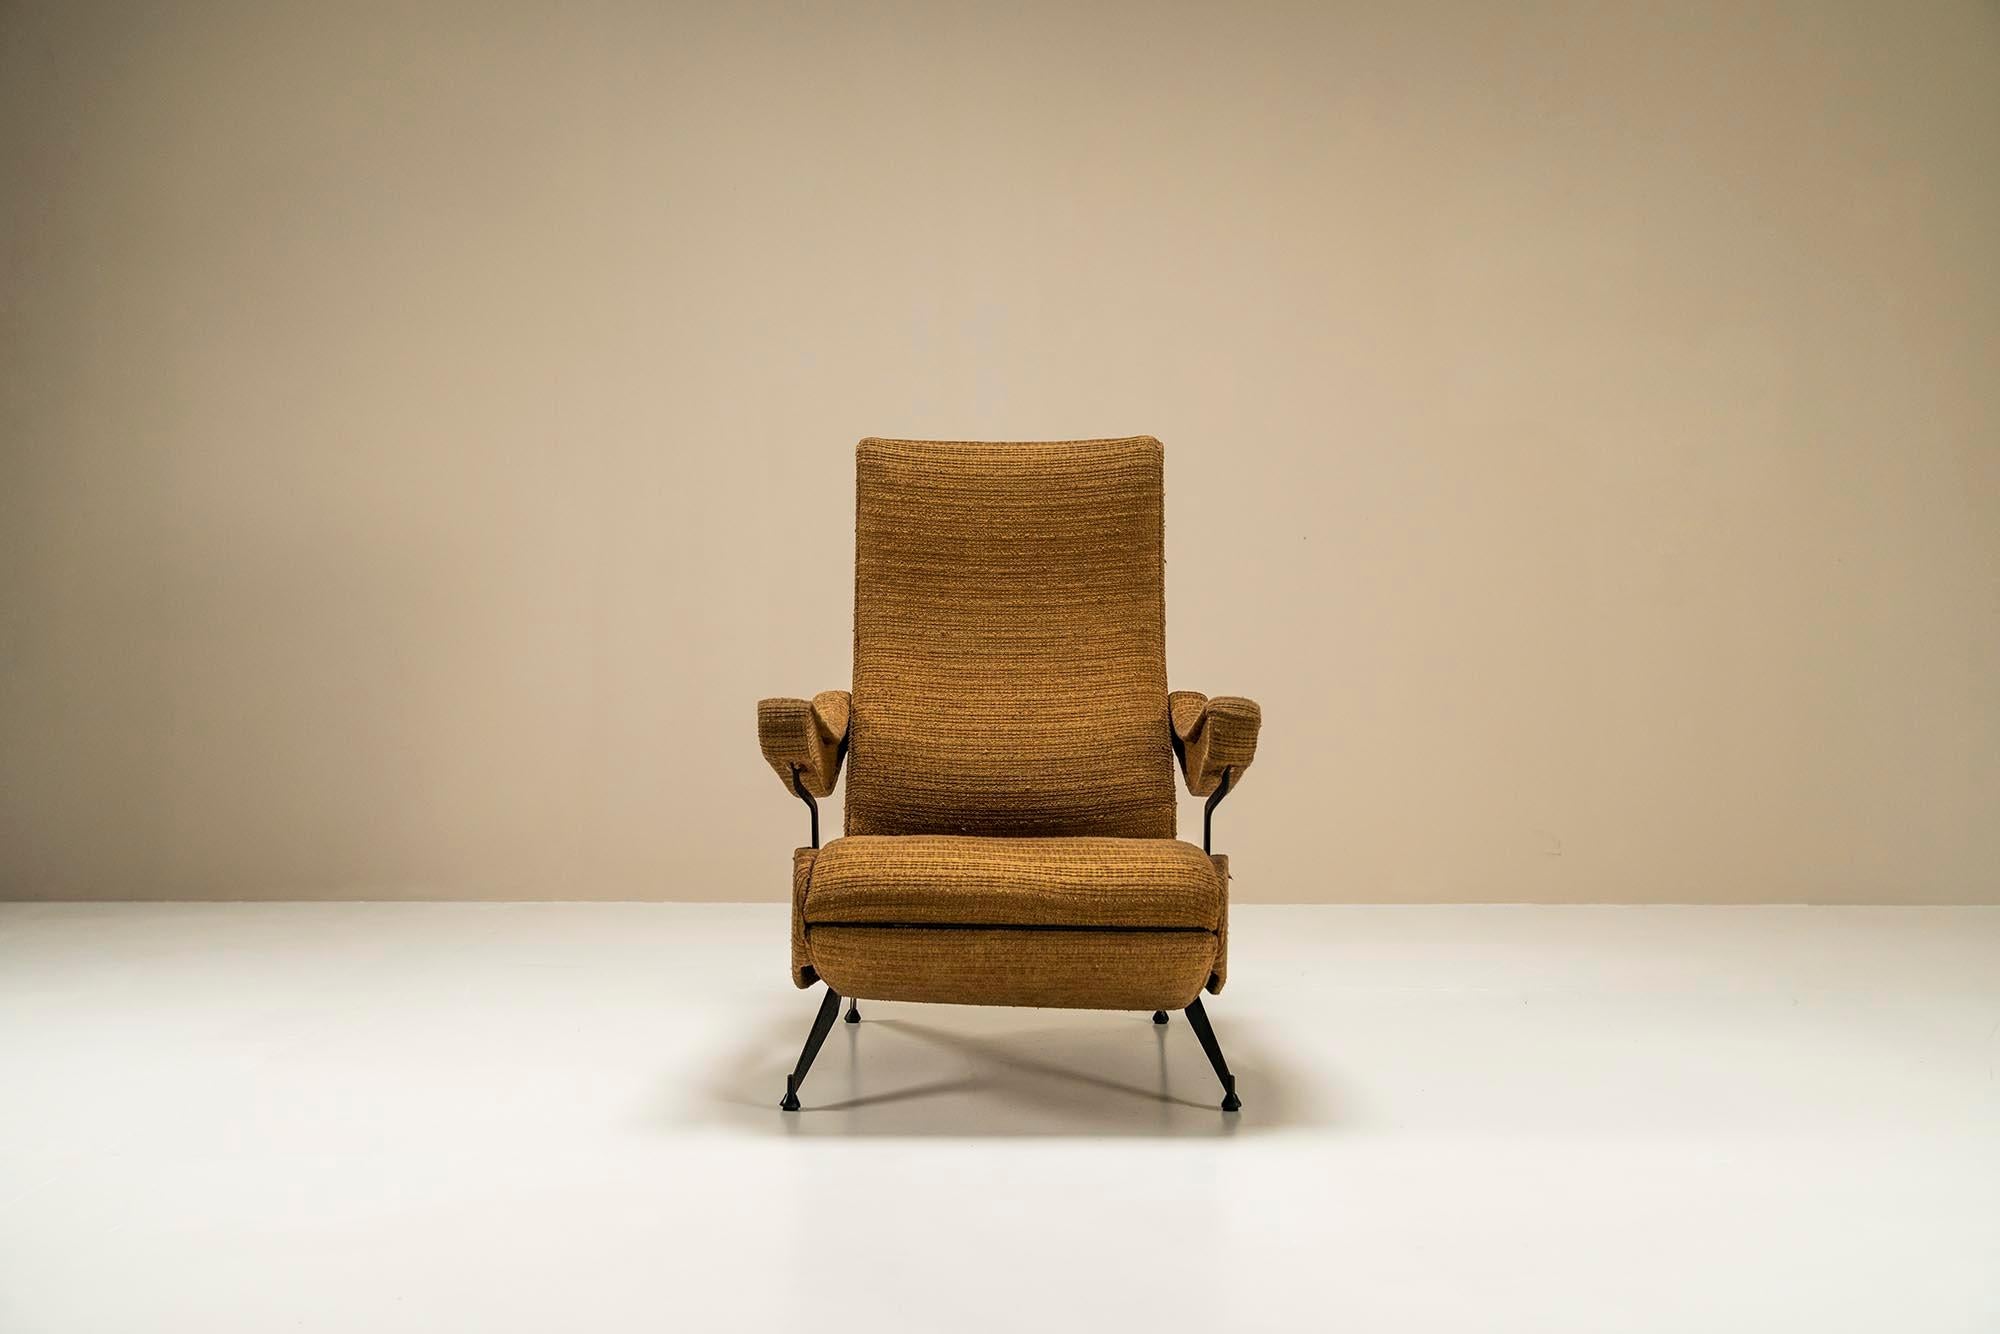 Italian Reclining Armchair in Steel and Fabric by Nello Pini for Novarredo, Italy, 1959 For Sale